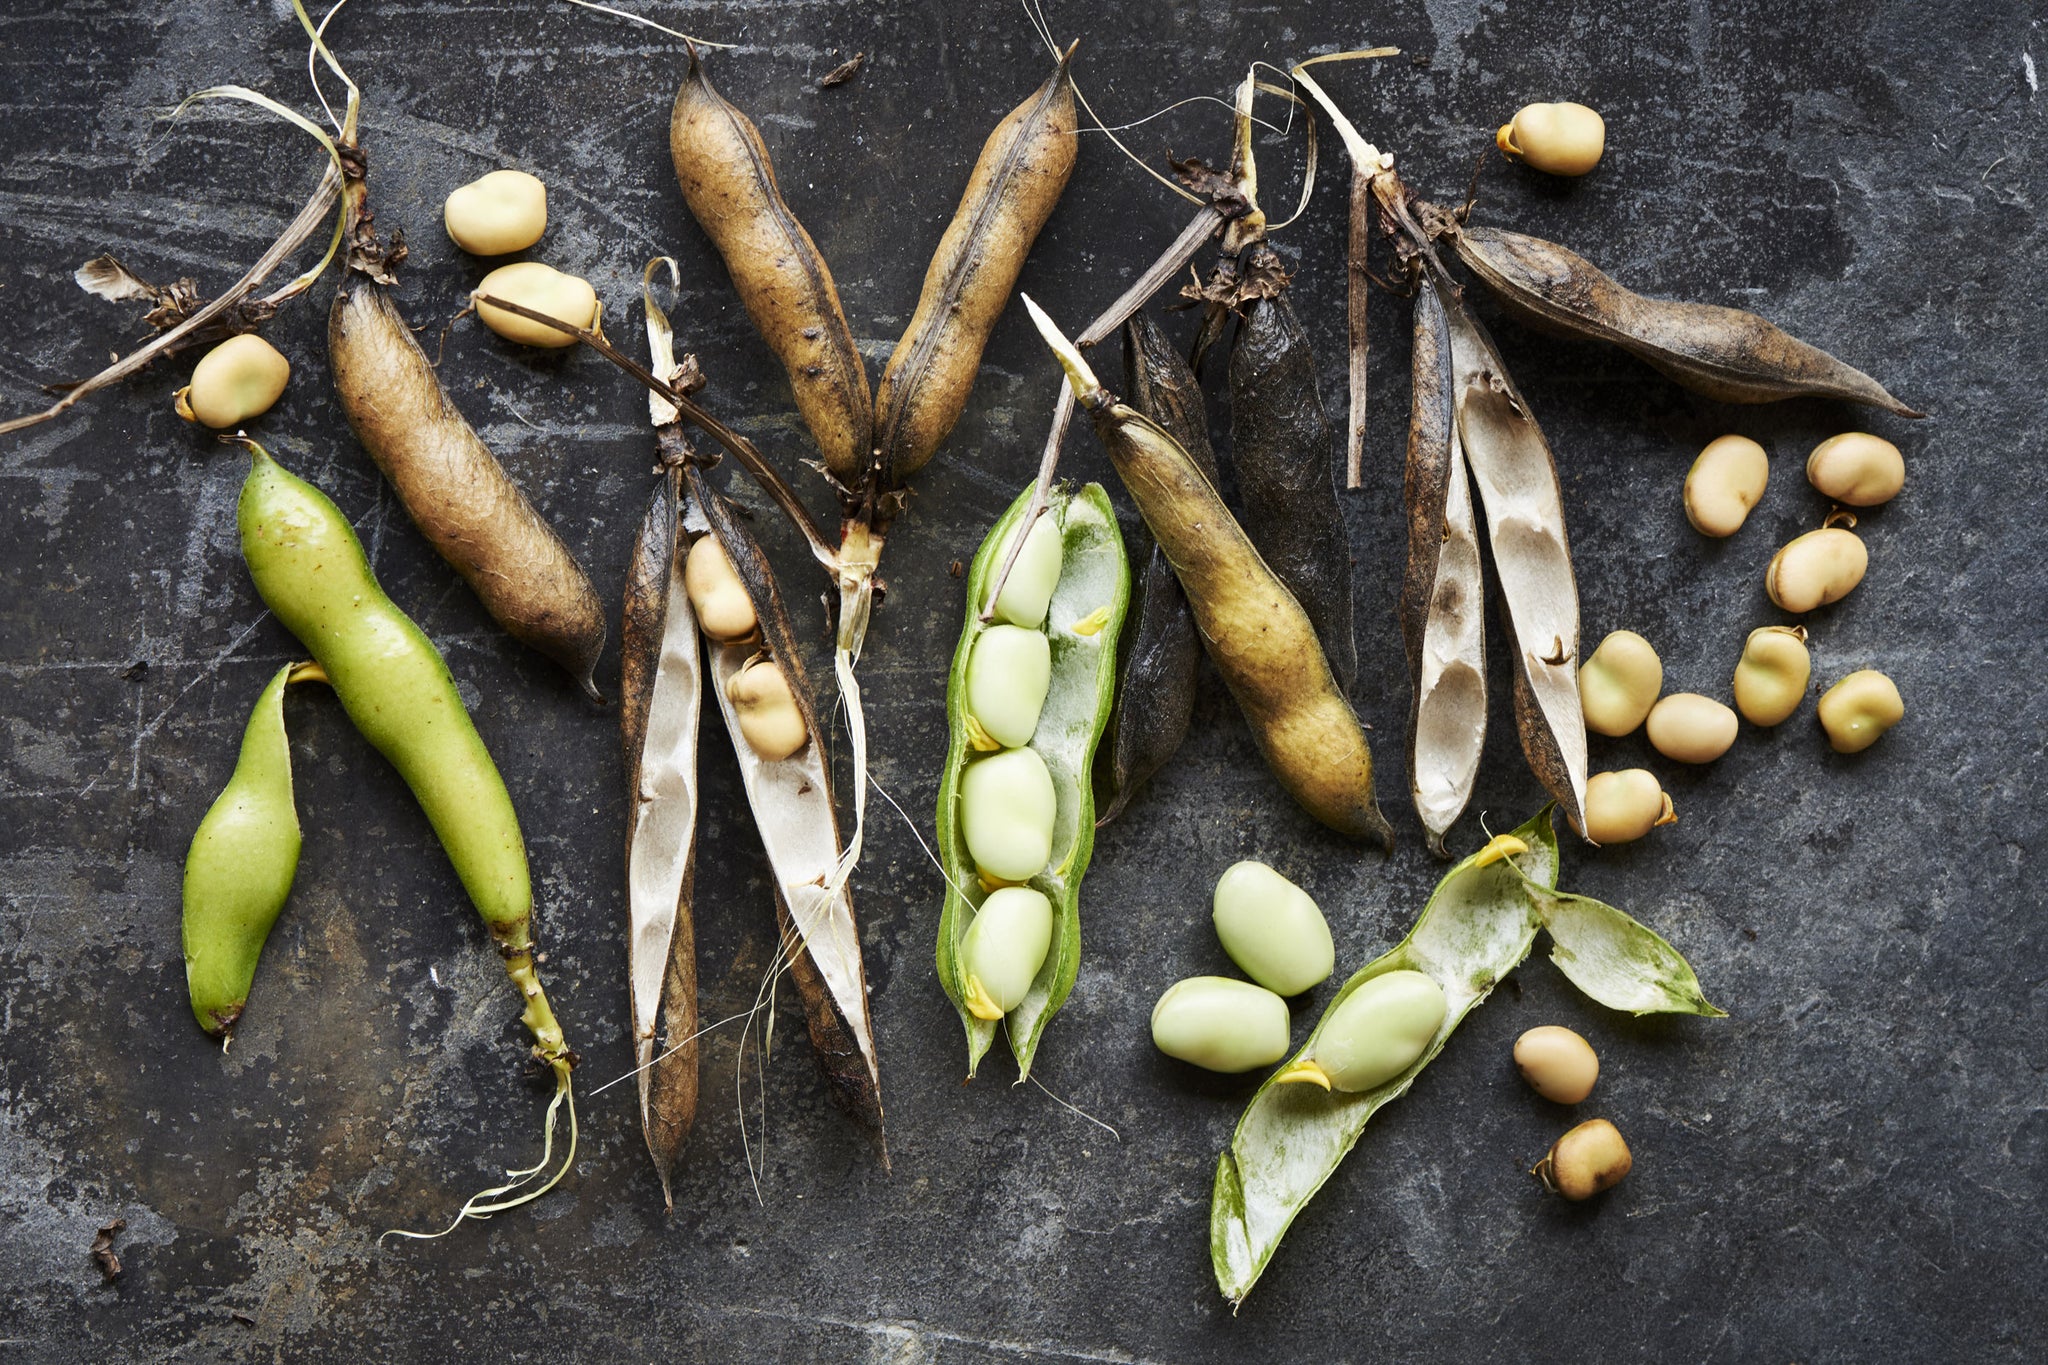 What are fava beans? Aren't they just broad beans?